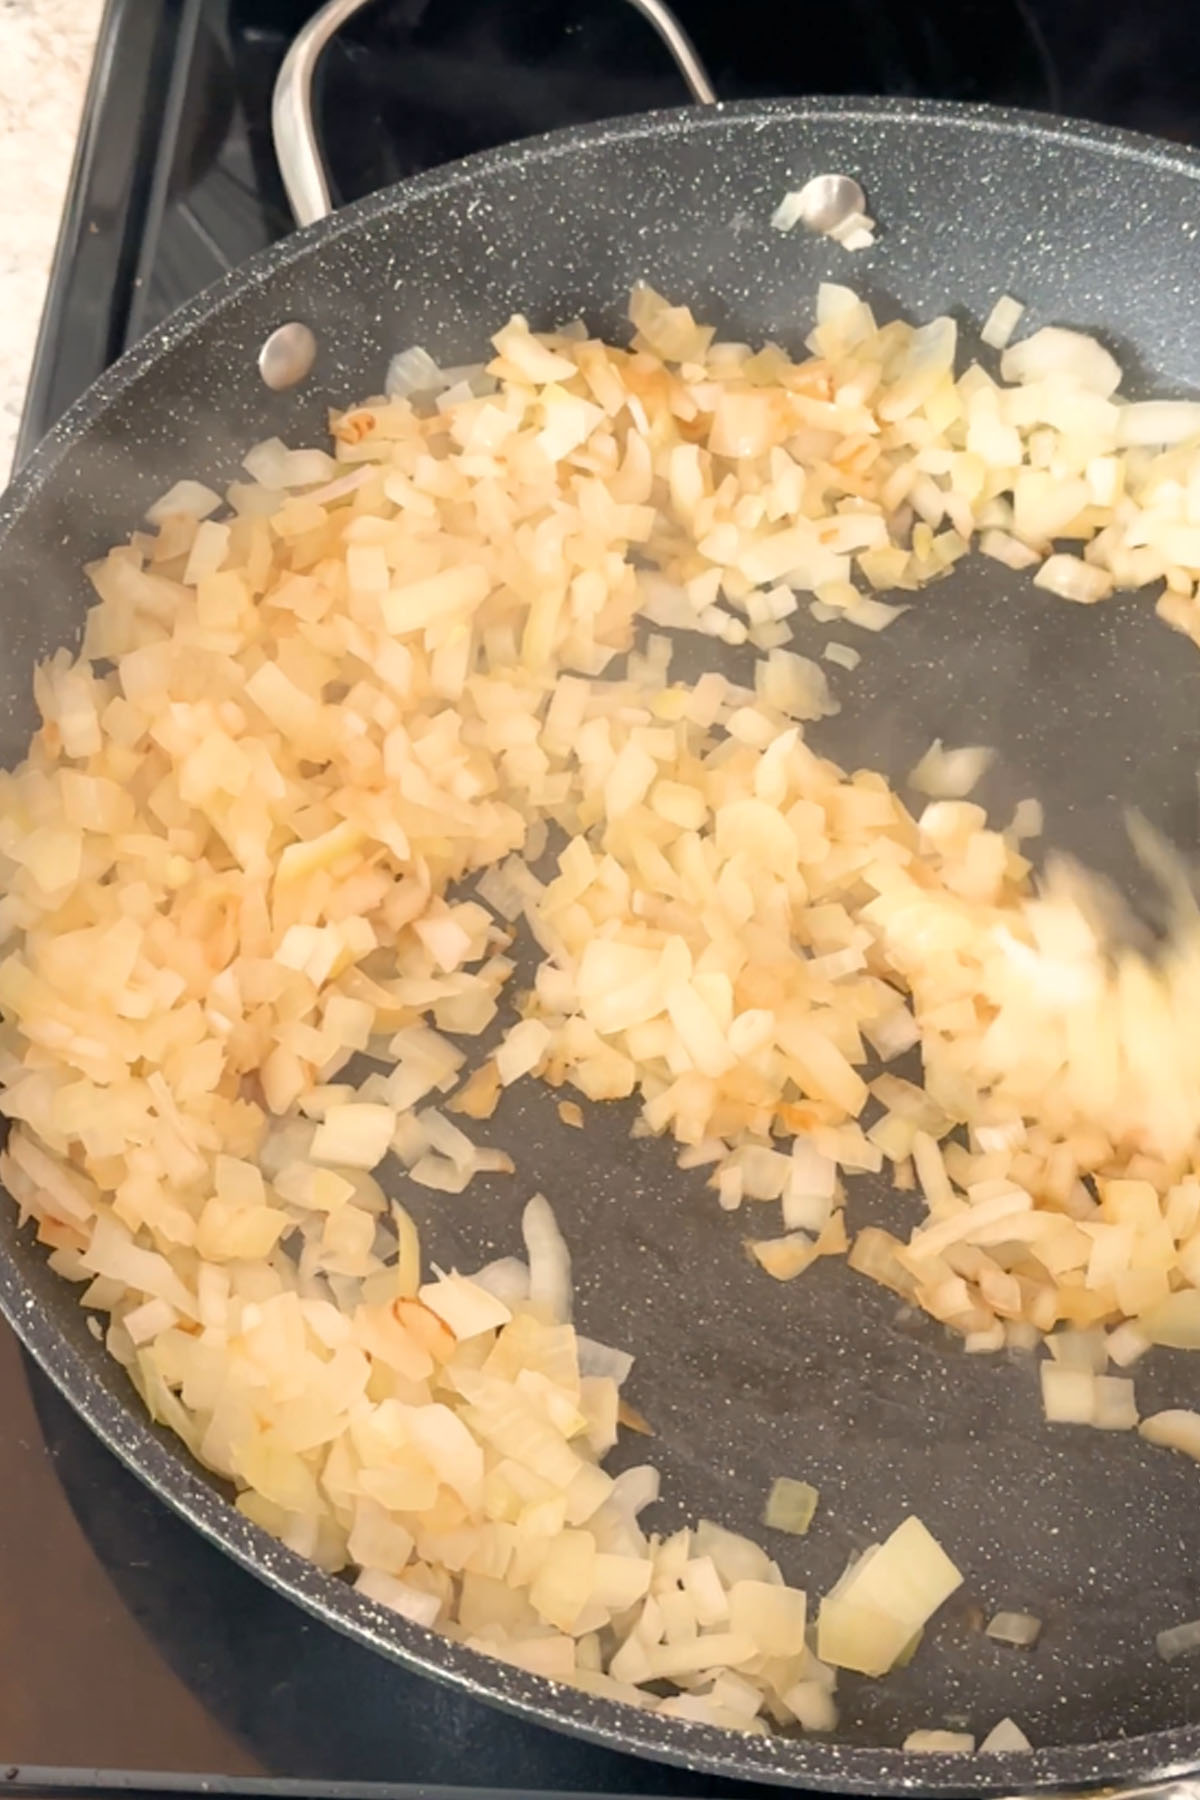 Onions are stirred in a skillet.